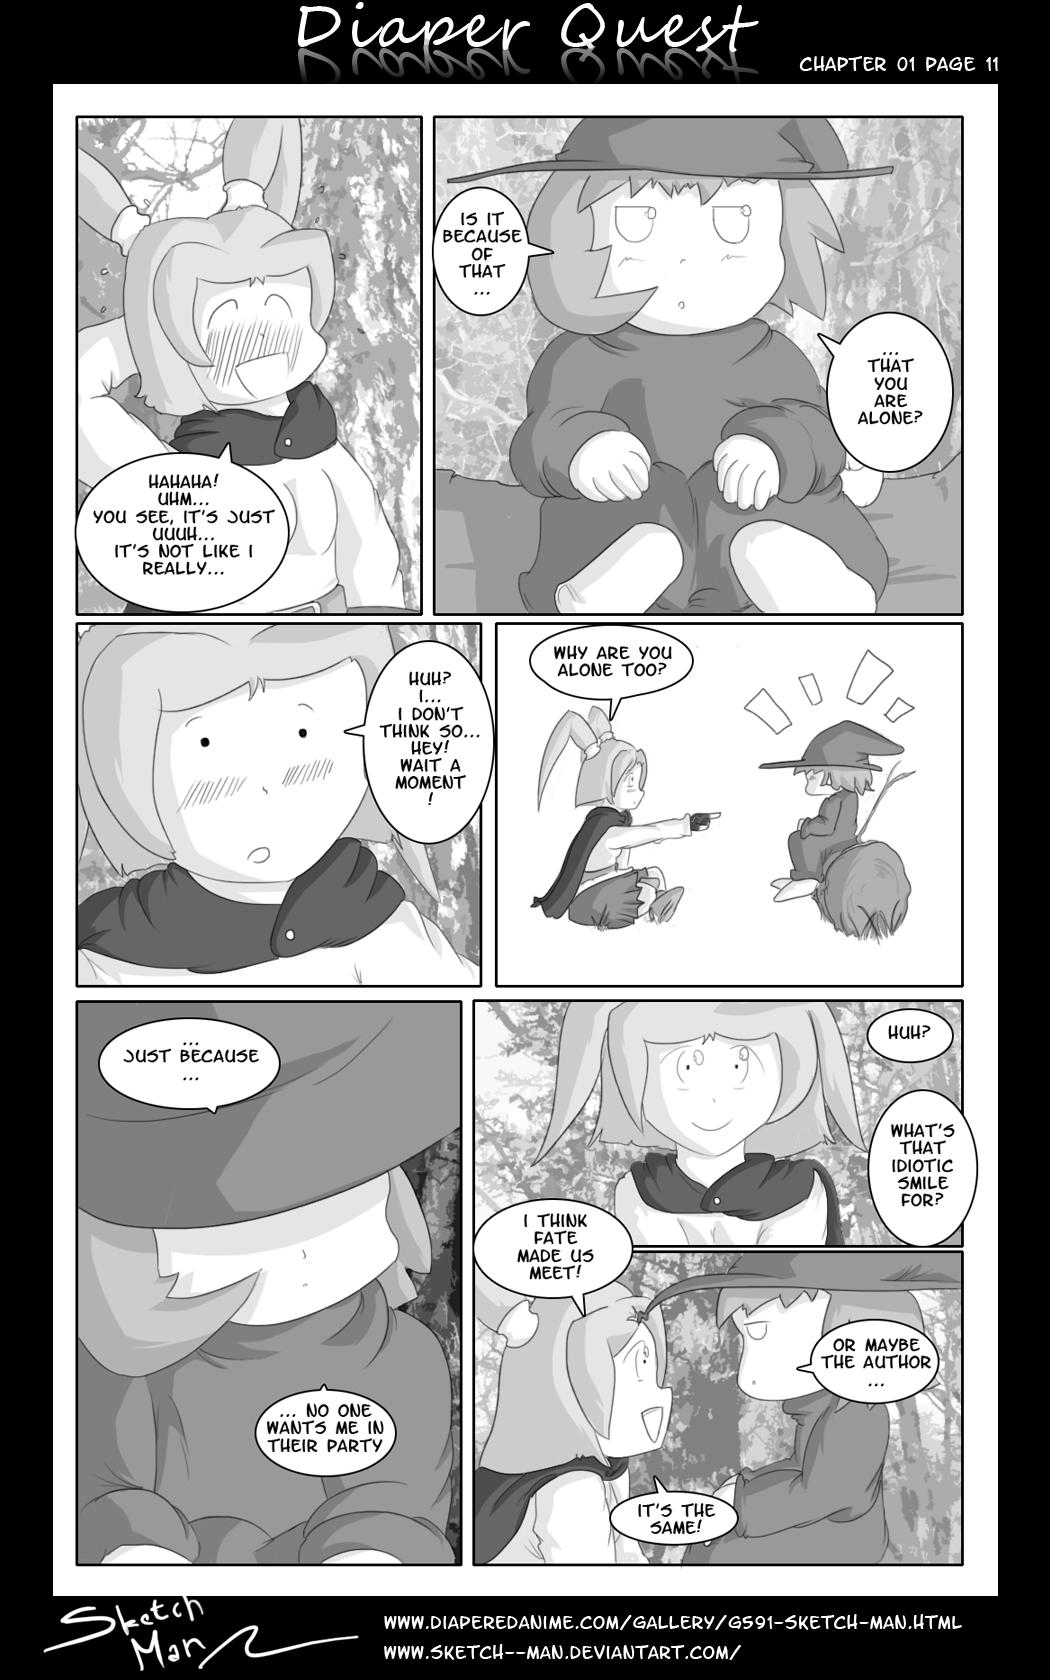 Free Rough Sex Sketch Man's Diaper Quest Complete Sensual - Page 11